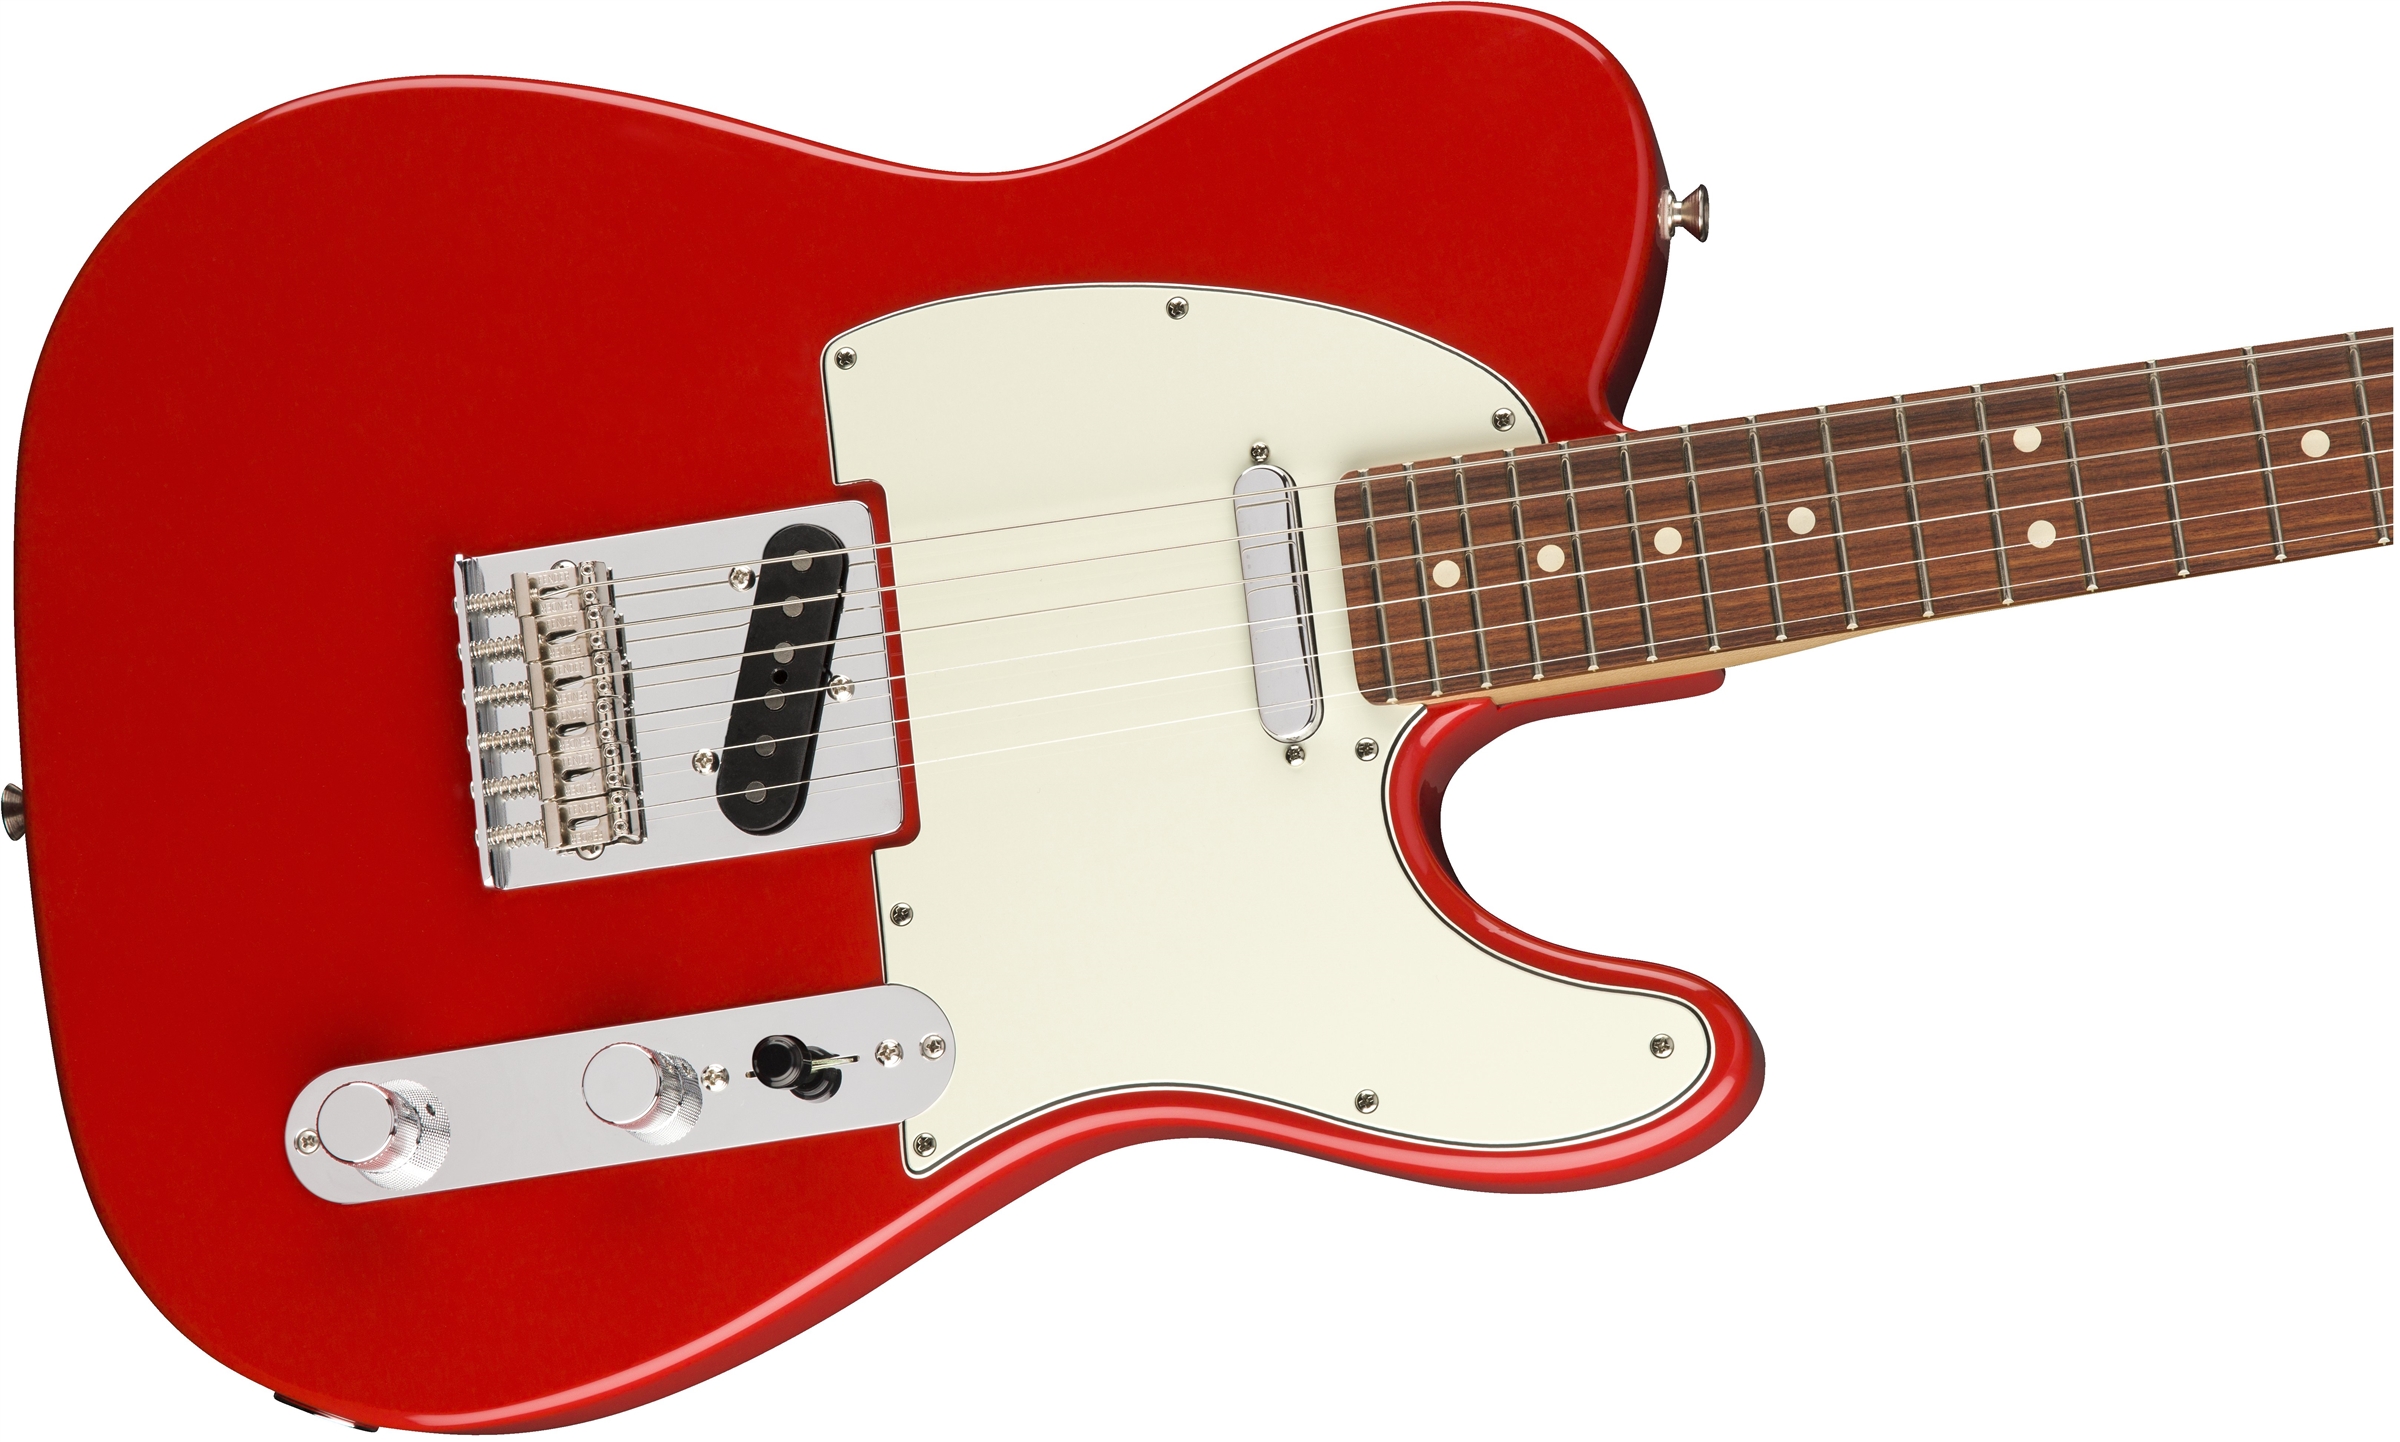 Fender Tele Player Mex Ss Pf - Sonic Red - Tel shape electric guitar - Variation 3